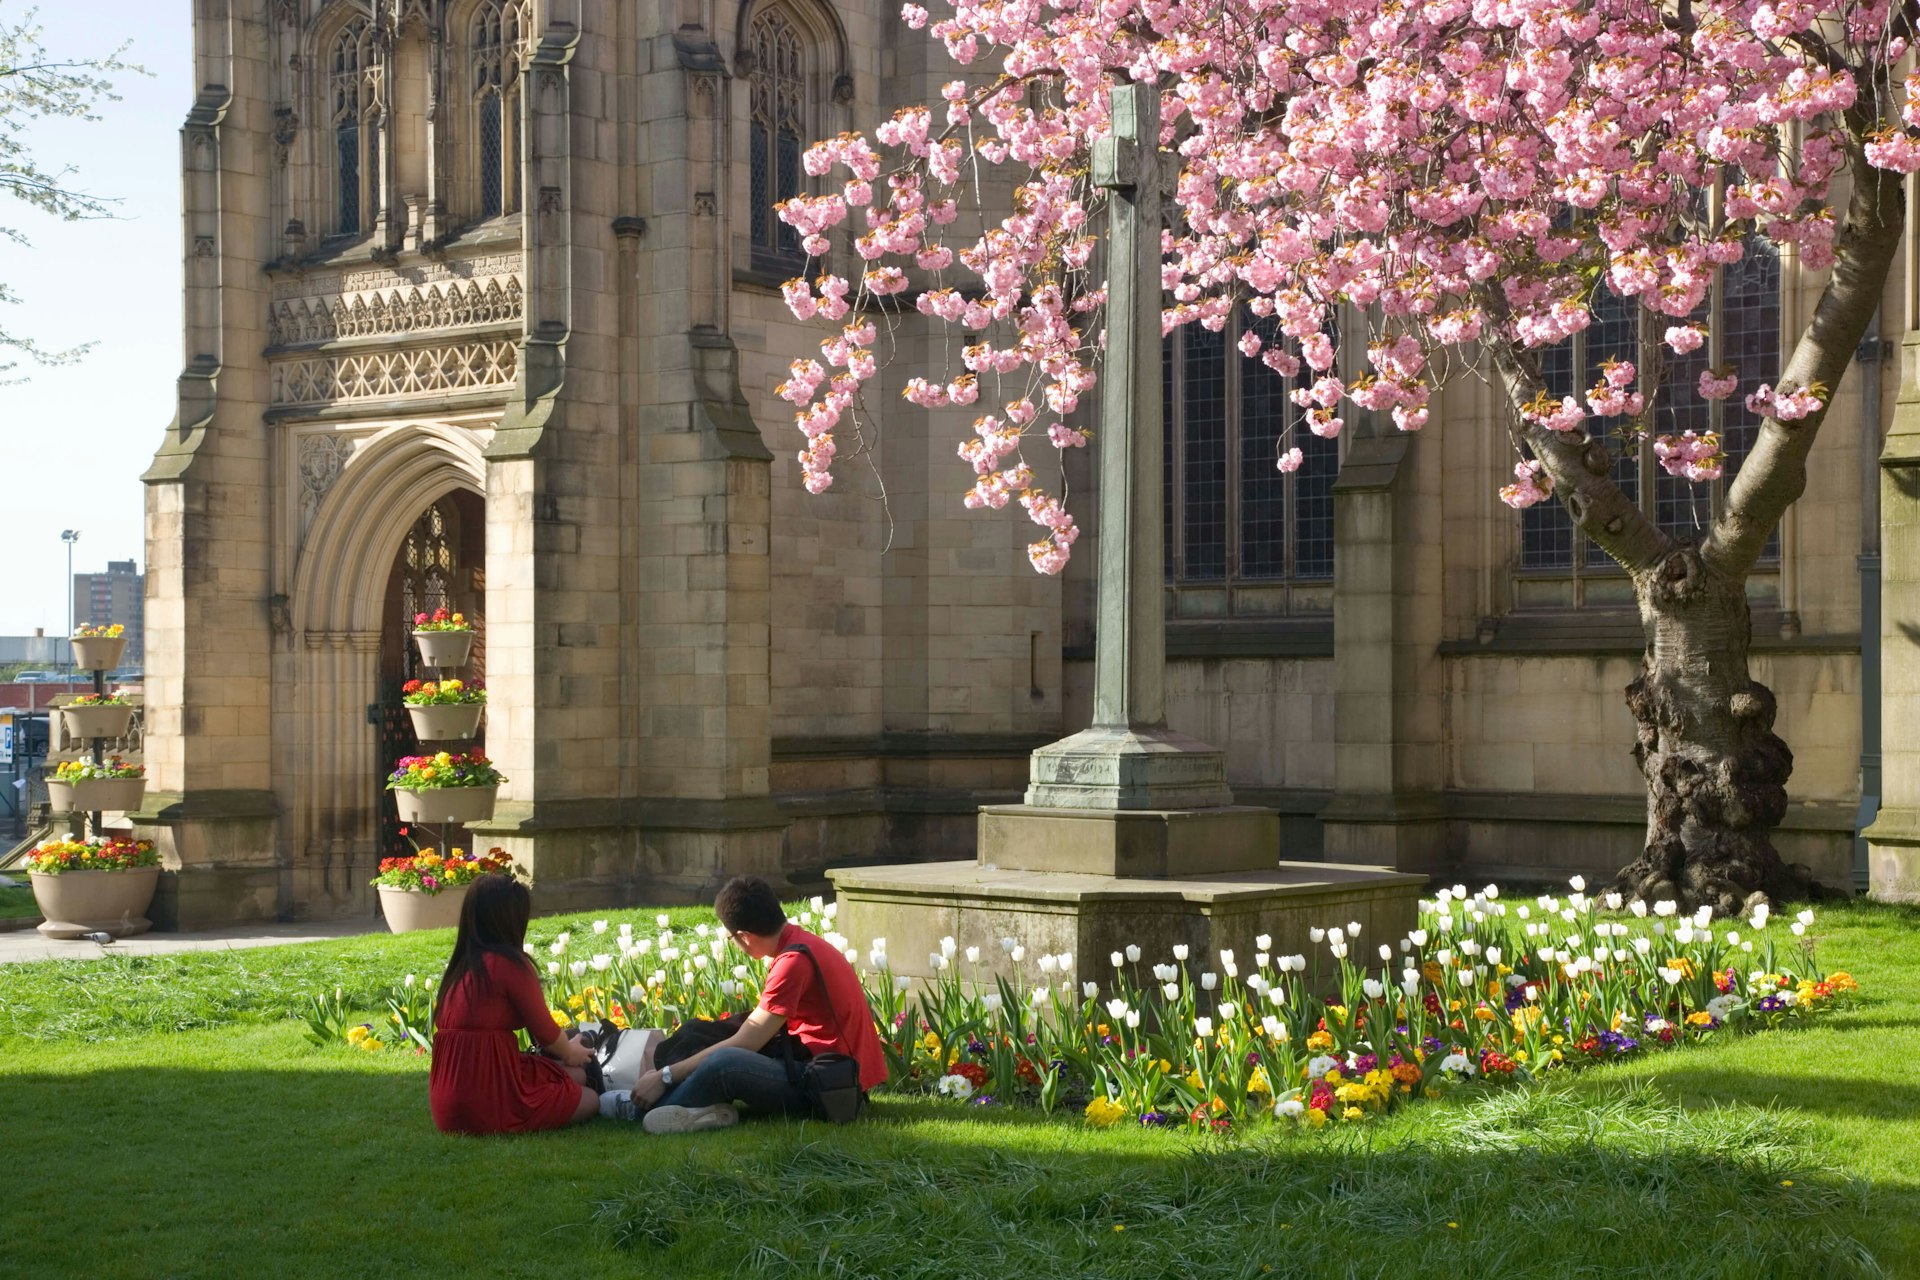 Visitors sitting on the grass near a cherry tree in bloom outside Manchester Cathedral